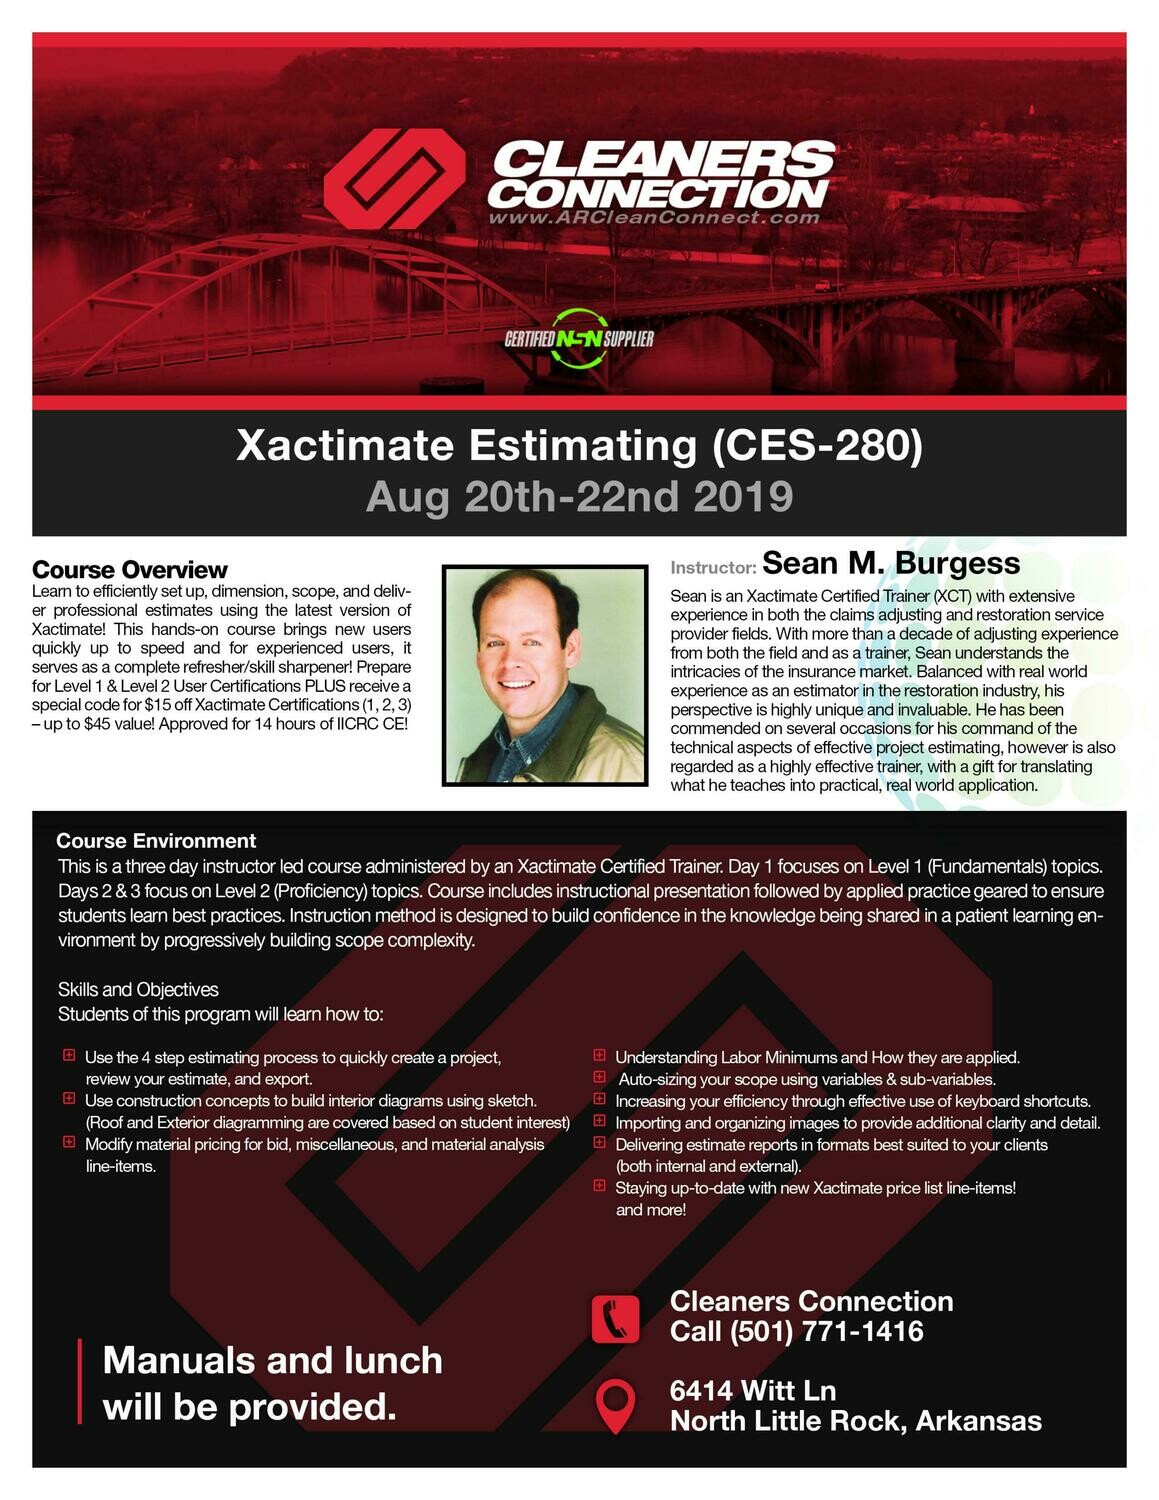 (SOLD OUT) Xactimate Estimating Class: Aug. 20th - 22nd 2019 | To find out more, call 800-391-4244 Mon-Fri 9am to 5pm.